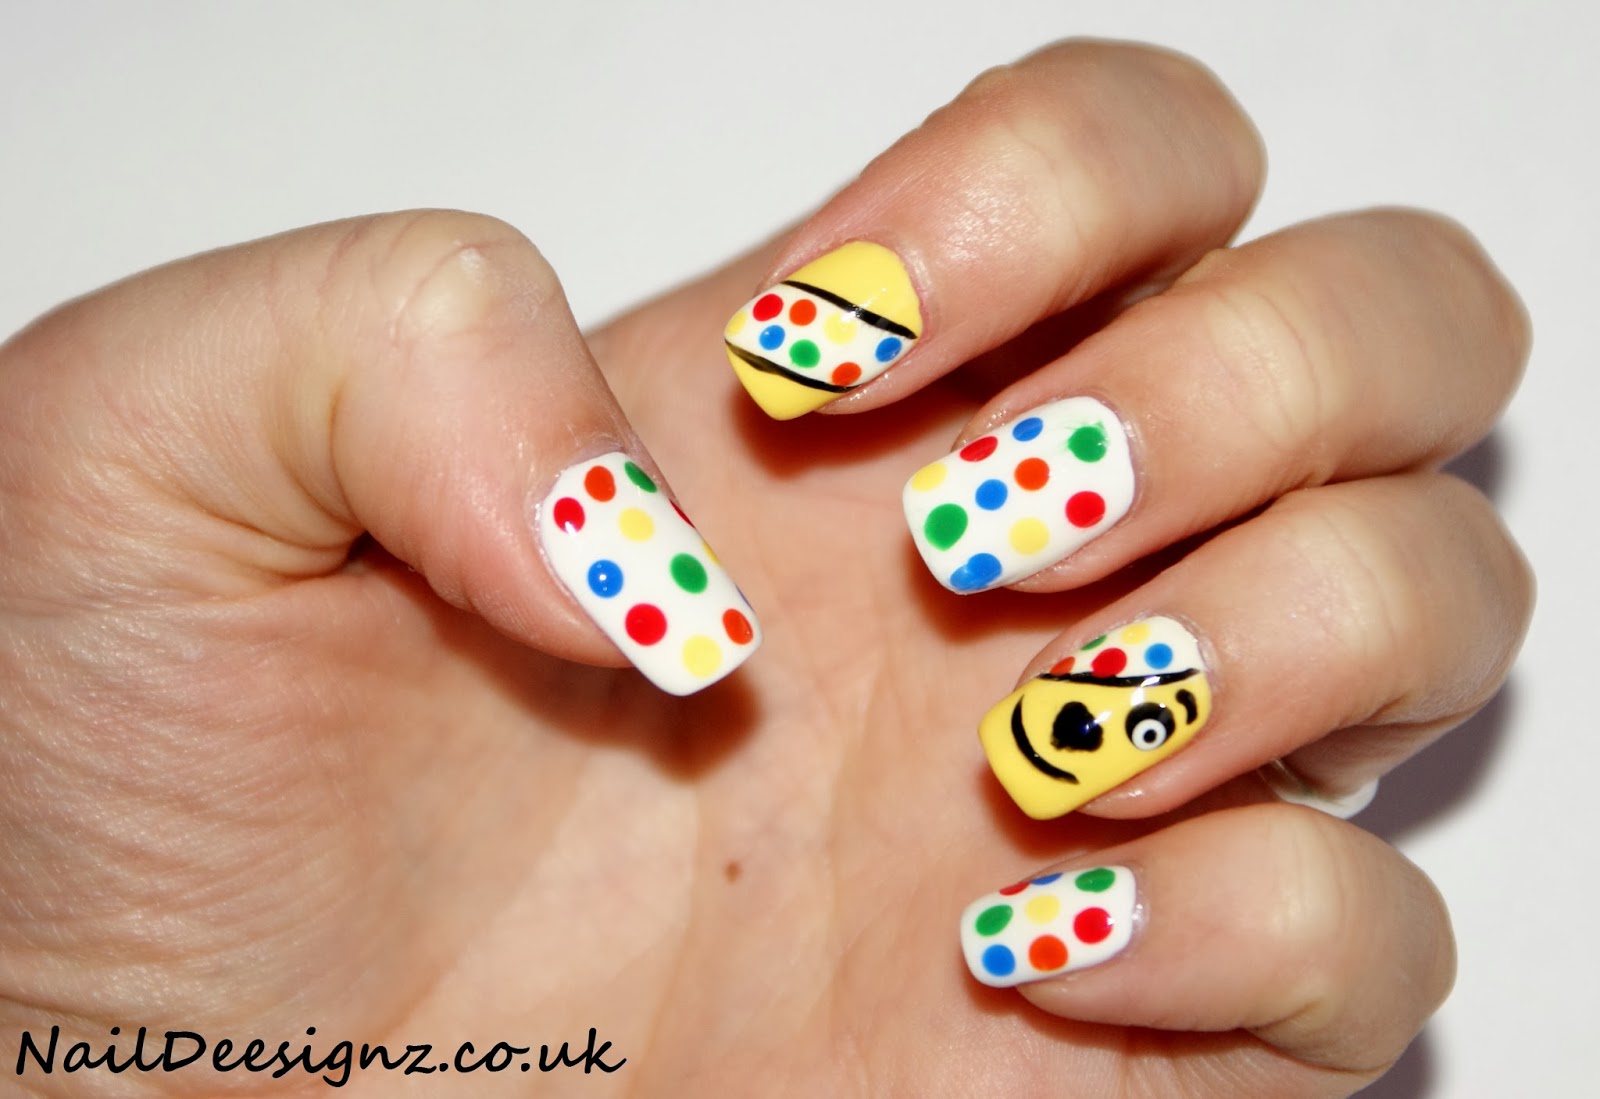 2. Easy Nail Art for Kids - wide 8